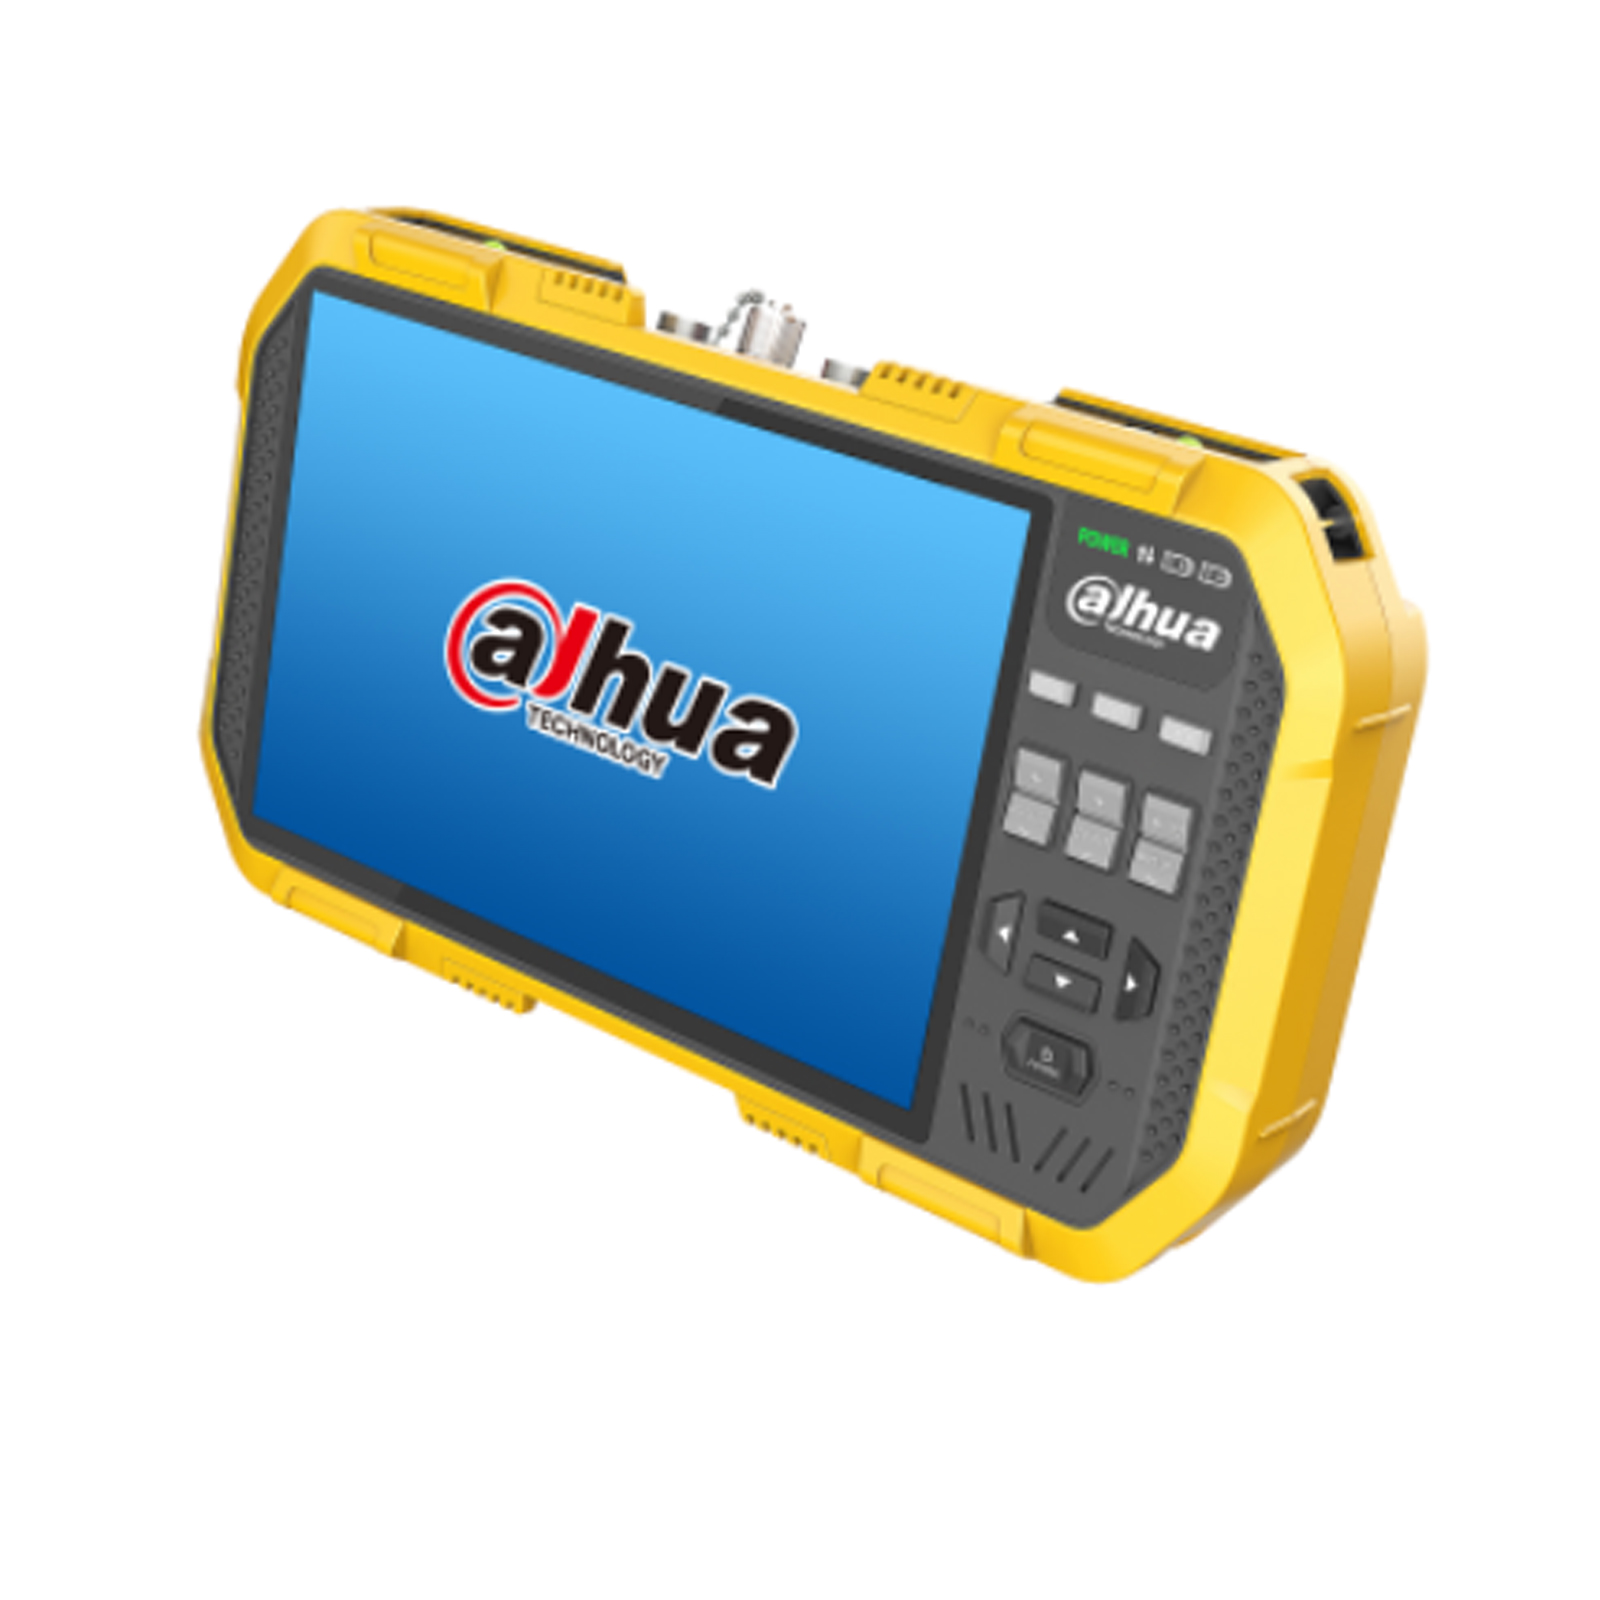 dahua 4in1 integrated assembly tester - 7 Inch